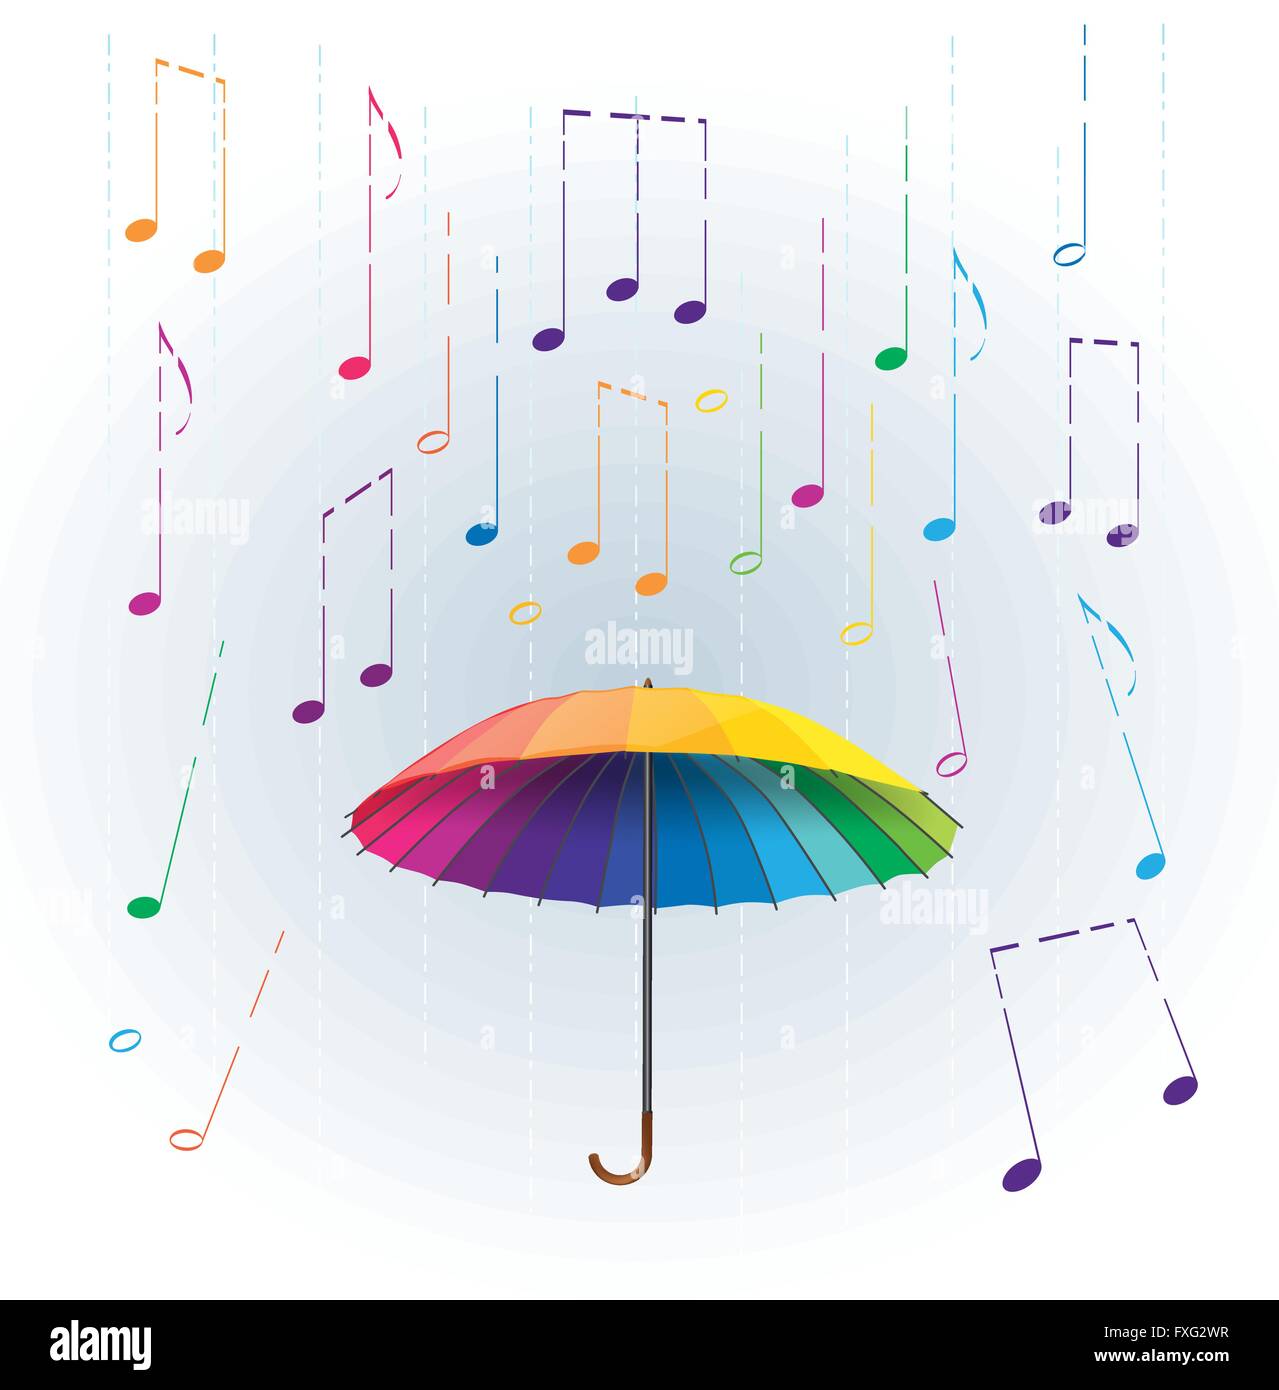 colorful rainbow umbrella with stylized like rain falling musical notes. abstract musical illustration Stock Vector